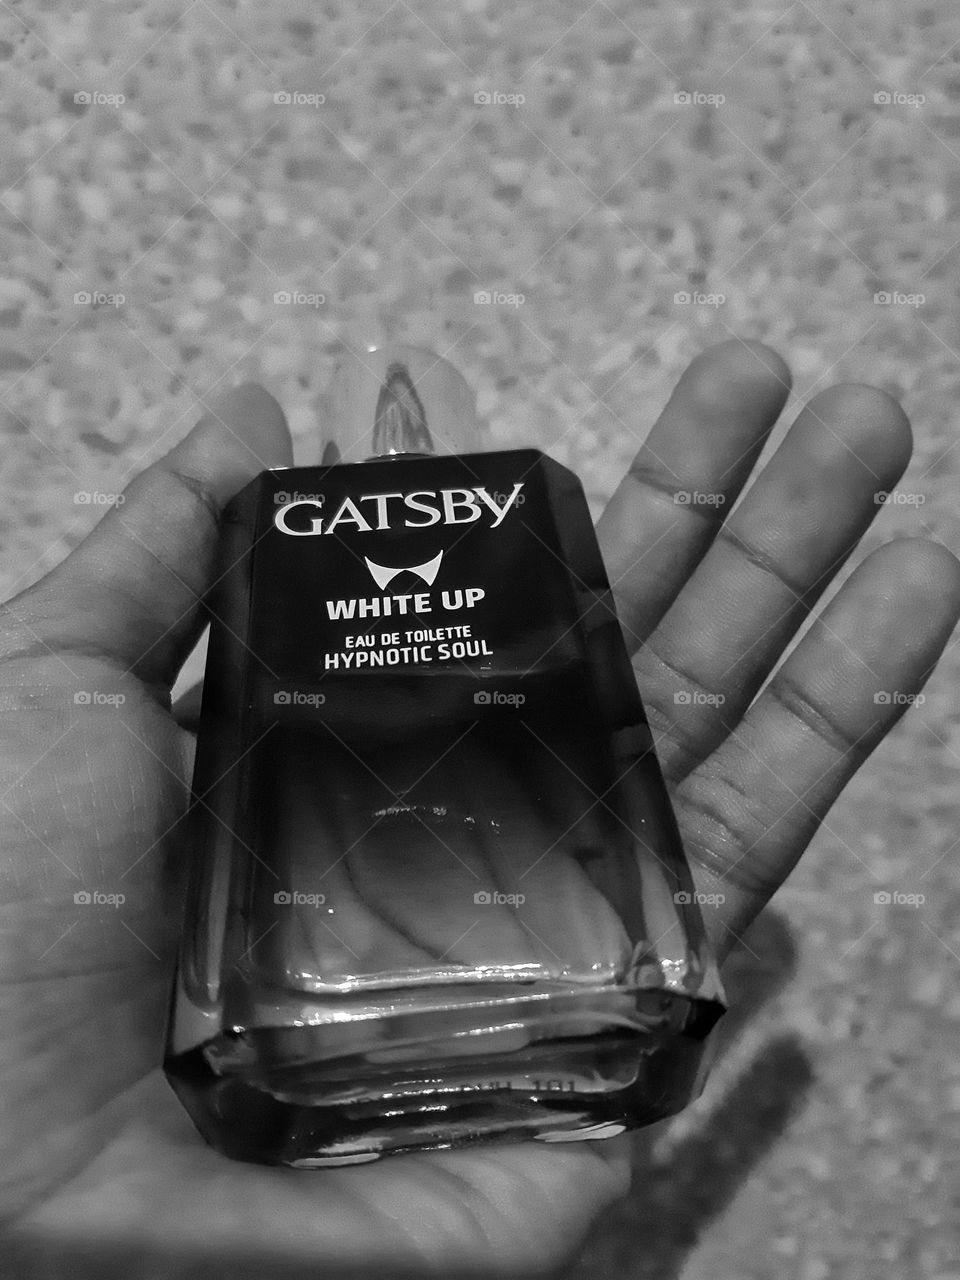 a perfume bottle in a hand named Gatsby as one of popular products in Indonesia